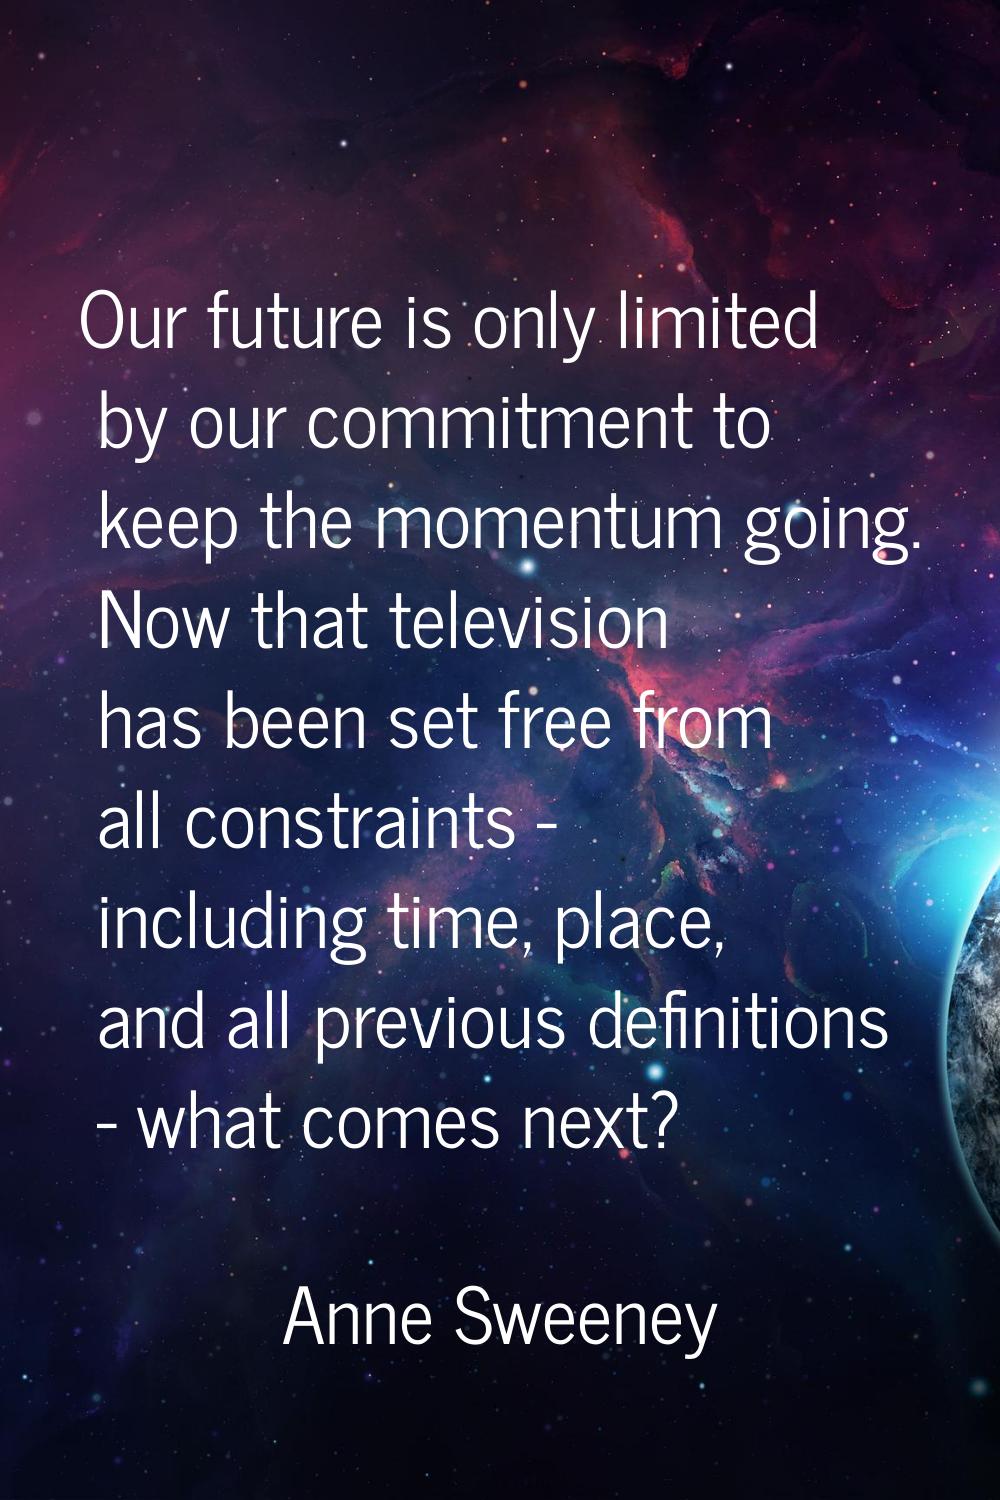 Our future is only limited by our commitment to keep the momentum going. Now that television has be